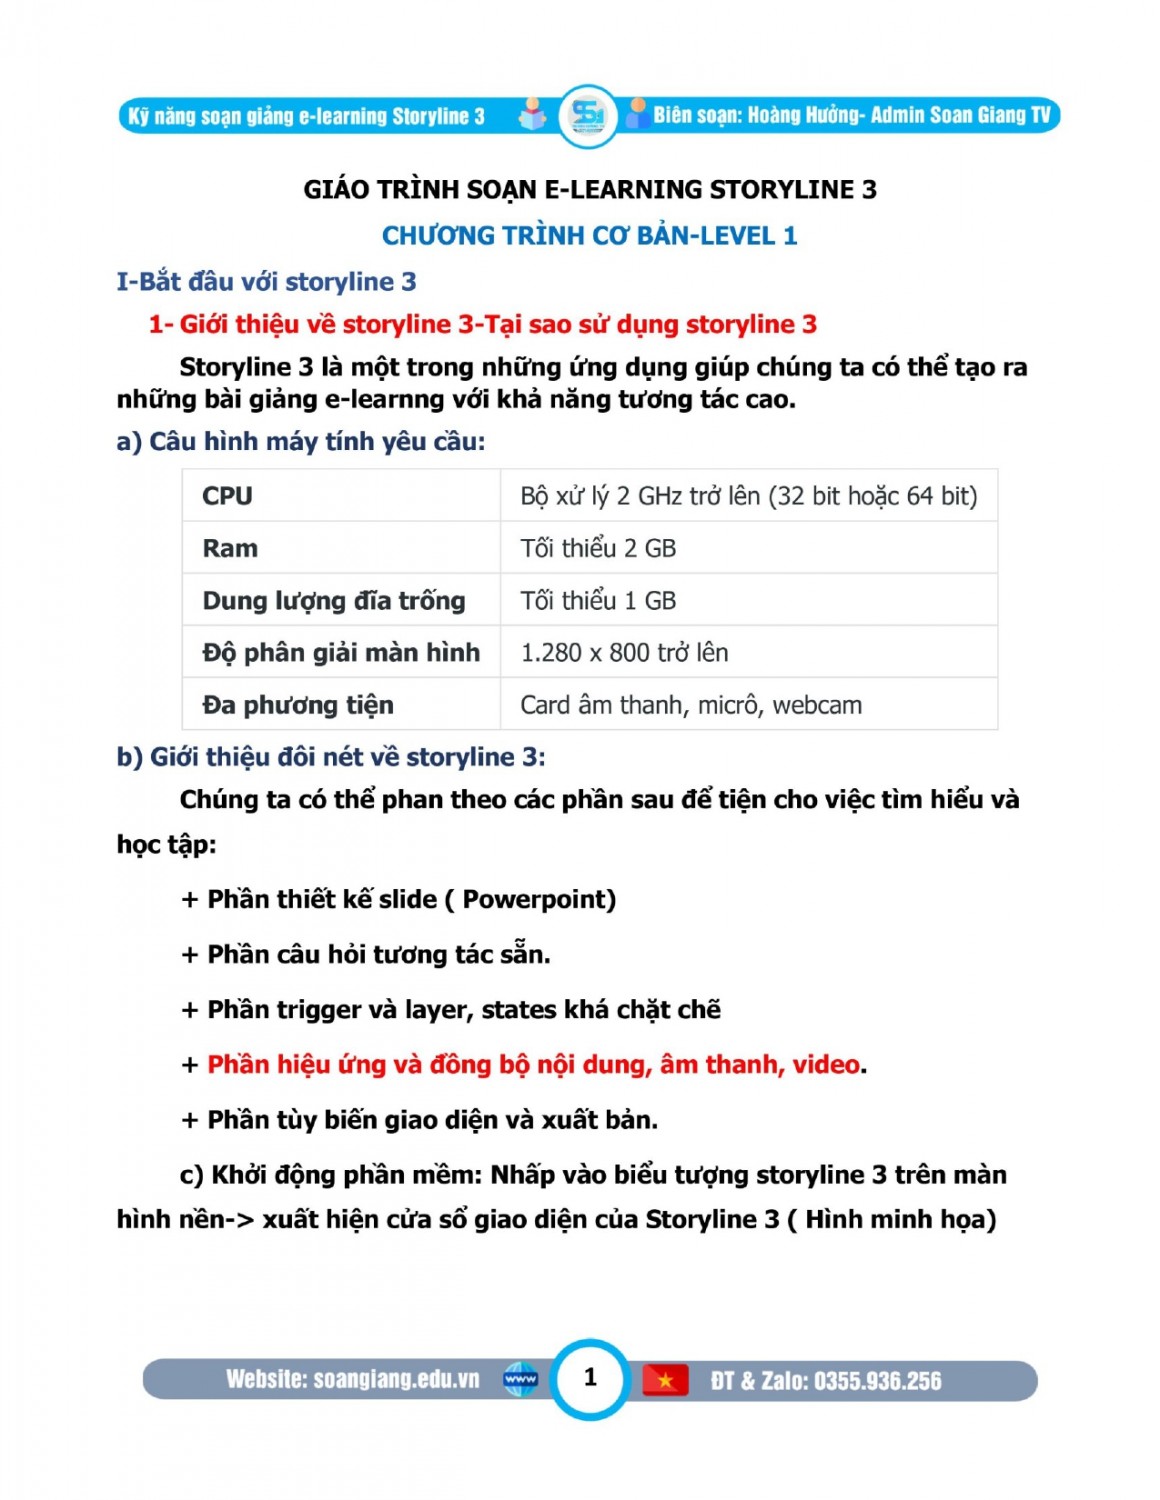 GIAO TRINH KY NANG E LEARNING STORYLINE 3 PDF pages to jpg 0004